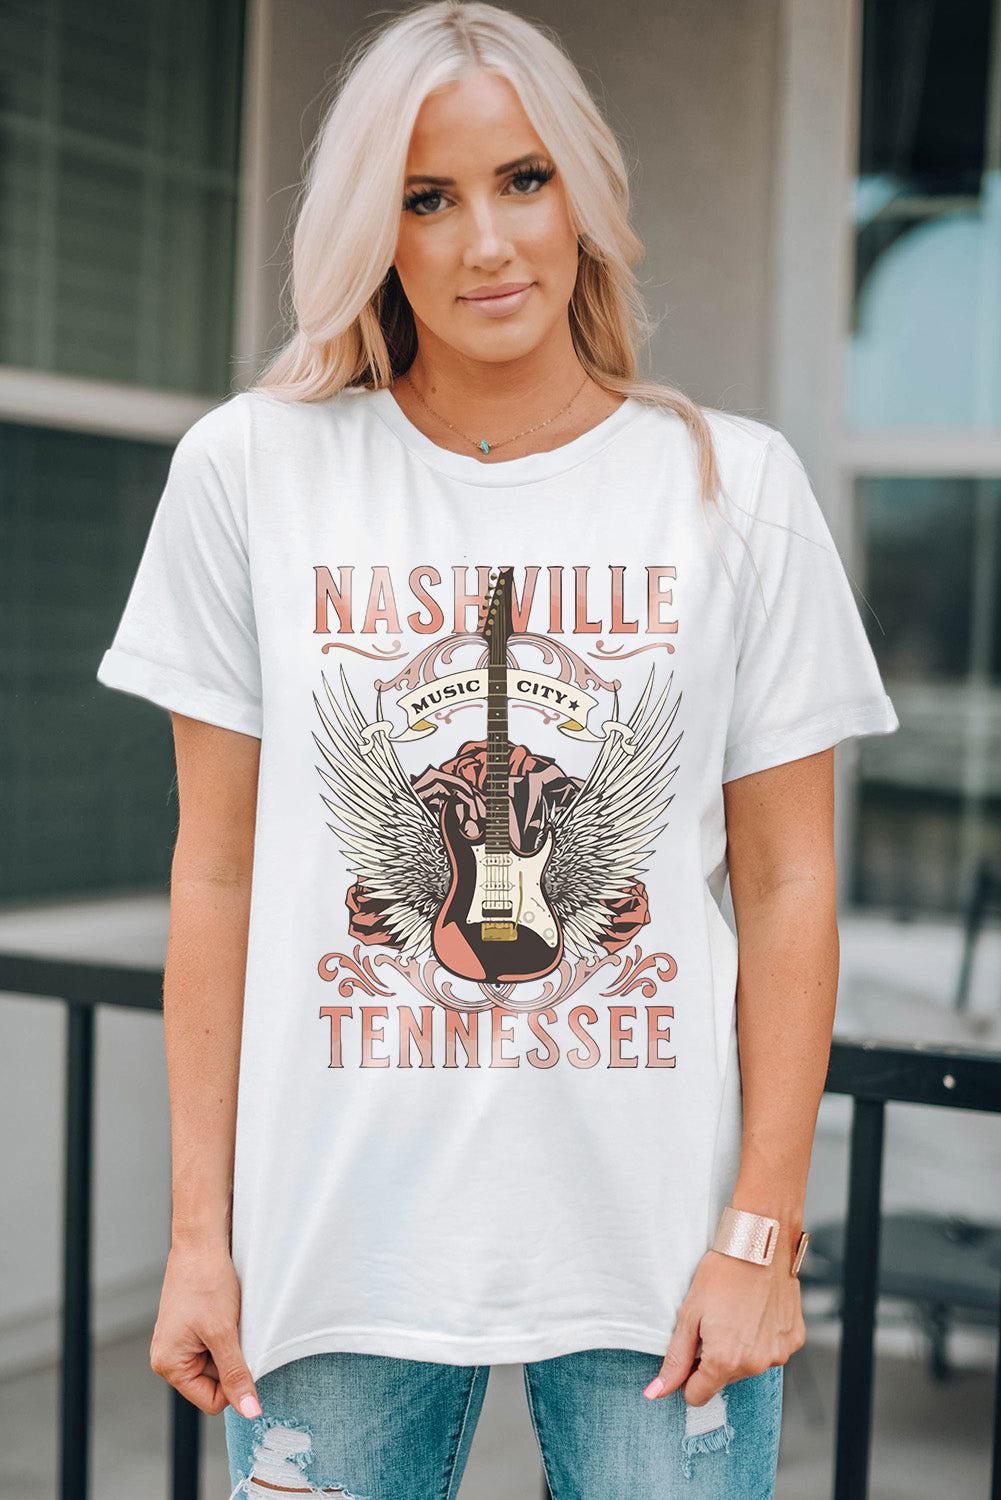 NASHVILLE TENNESSEE Graphic Tee Shirt BLUE ZONE PLANET